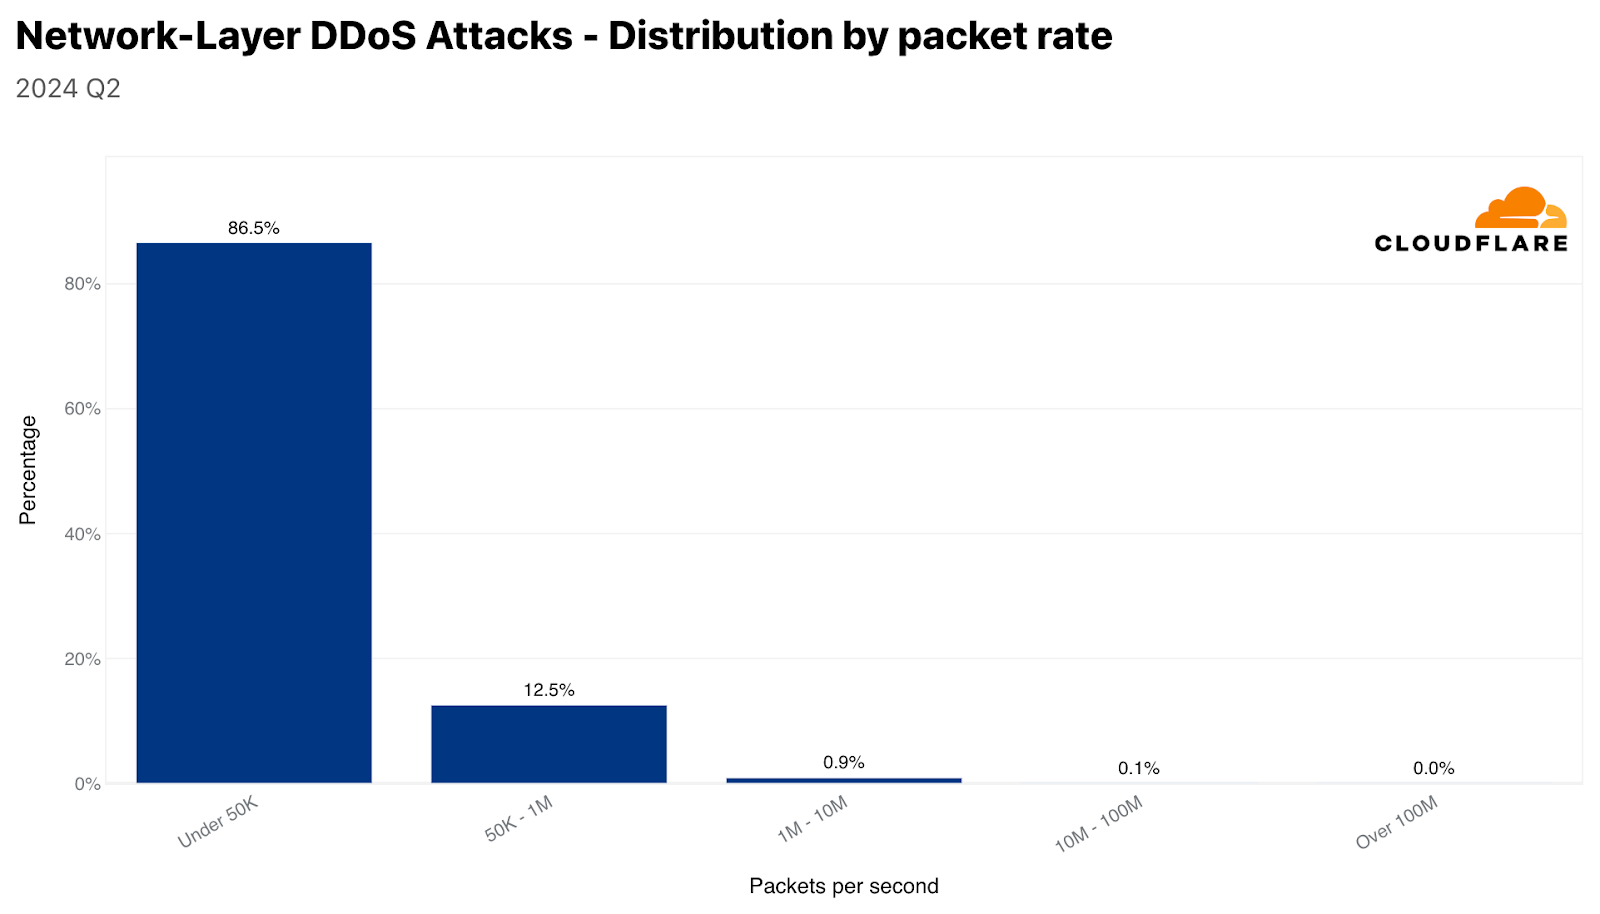 Distribution of network-layer DDoS attacks by packet rate